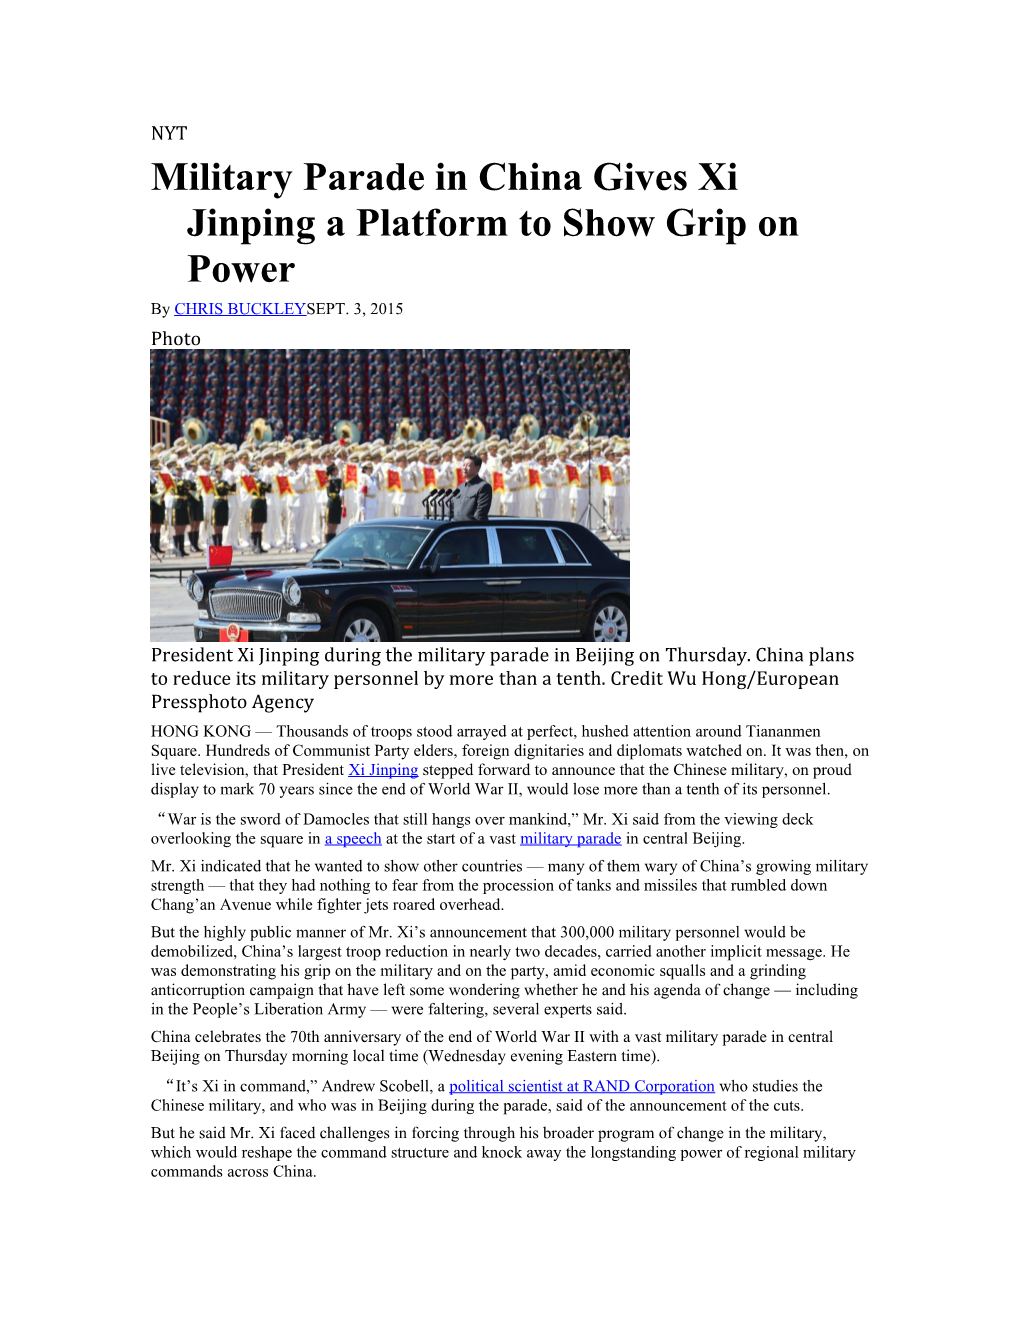 Military Parade in China Gives Xi Jinping a Platform to Show Grip on Power